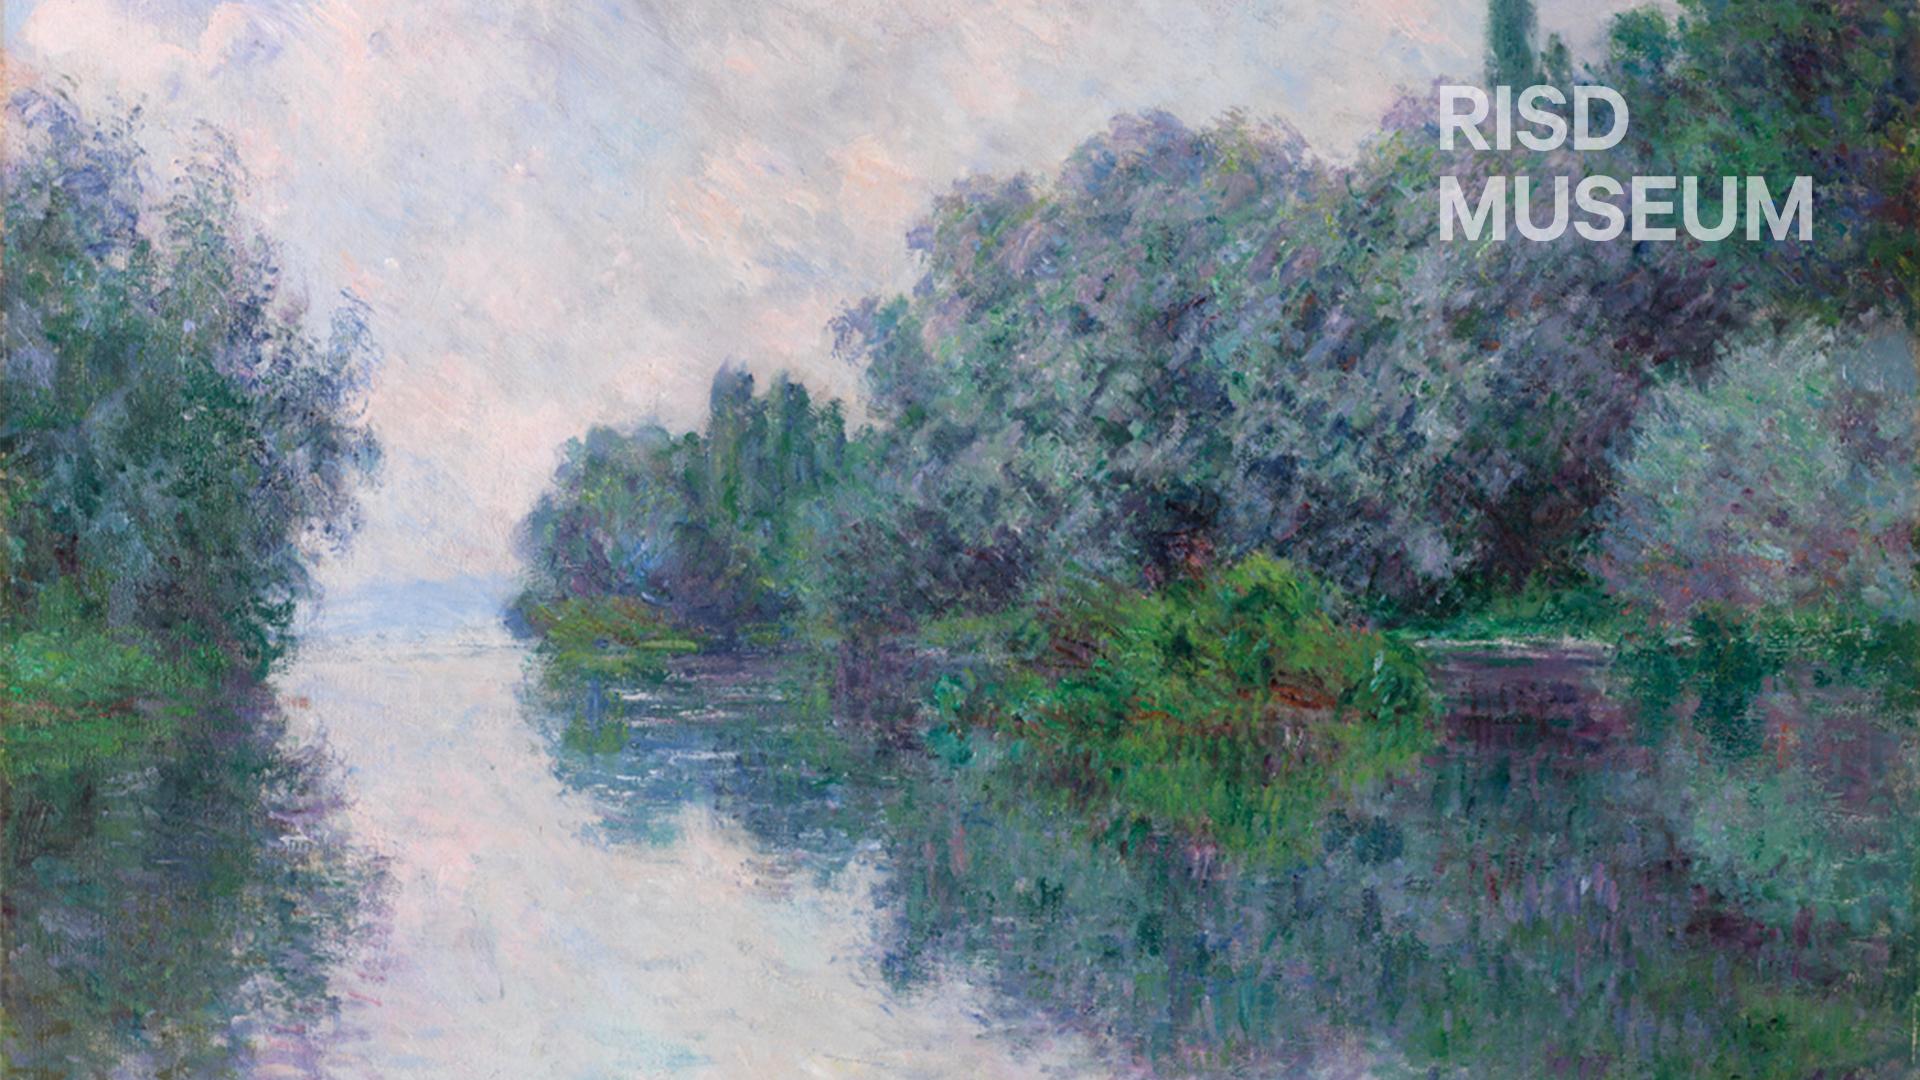 Zoom Background featuring The Seine at Giverny by Claude Monet